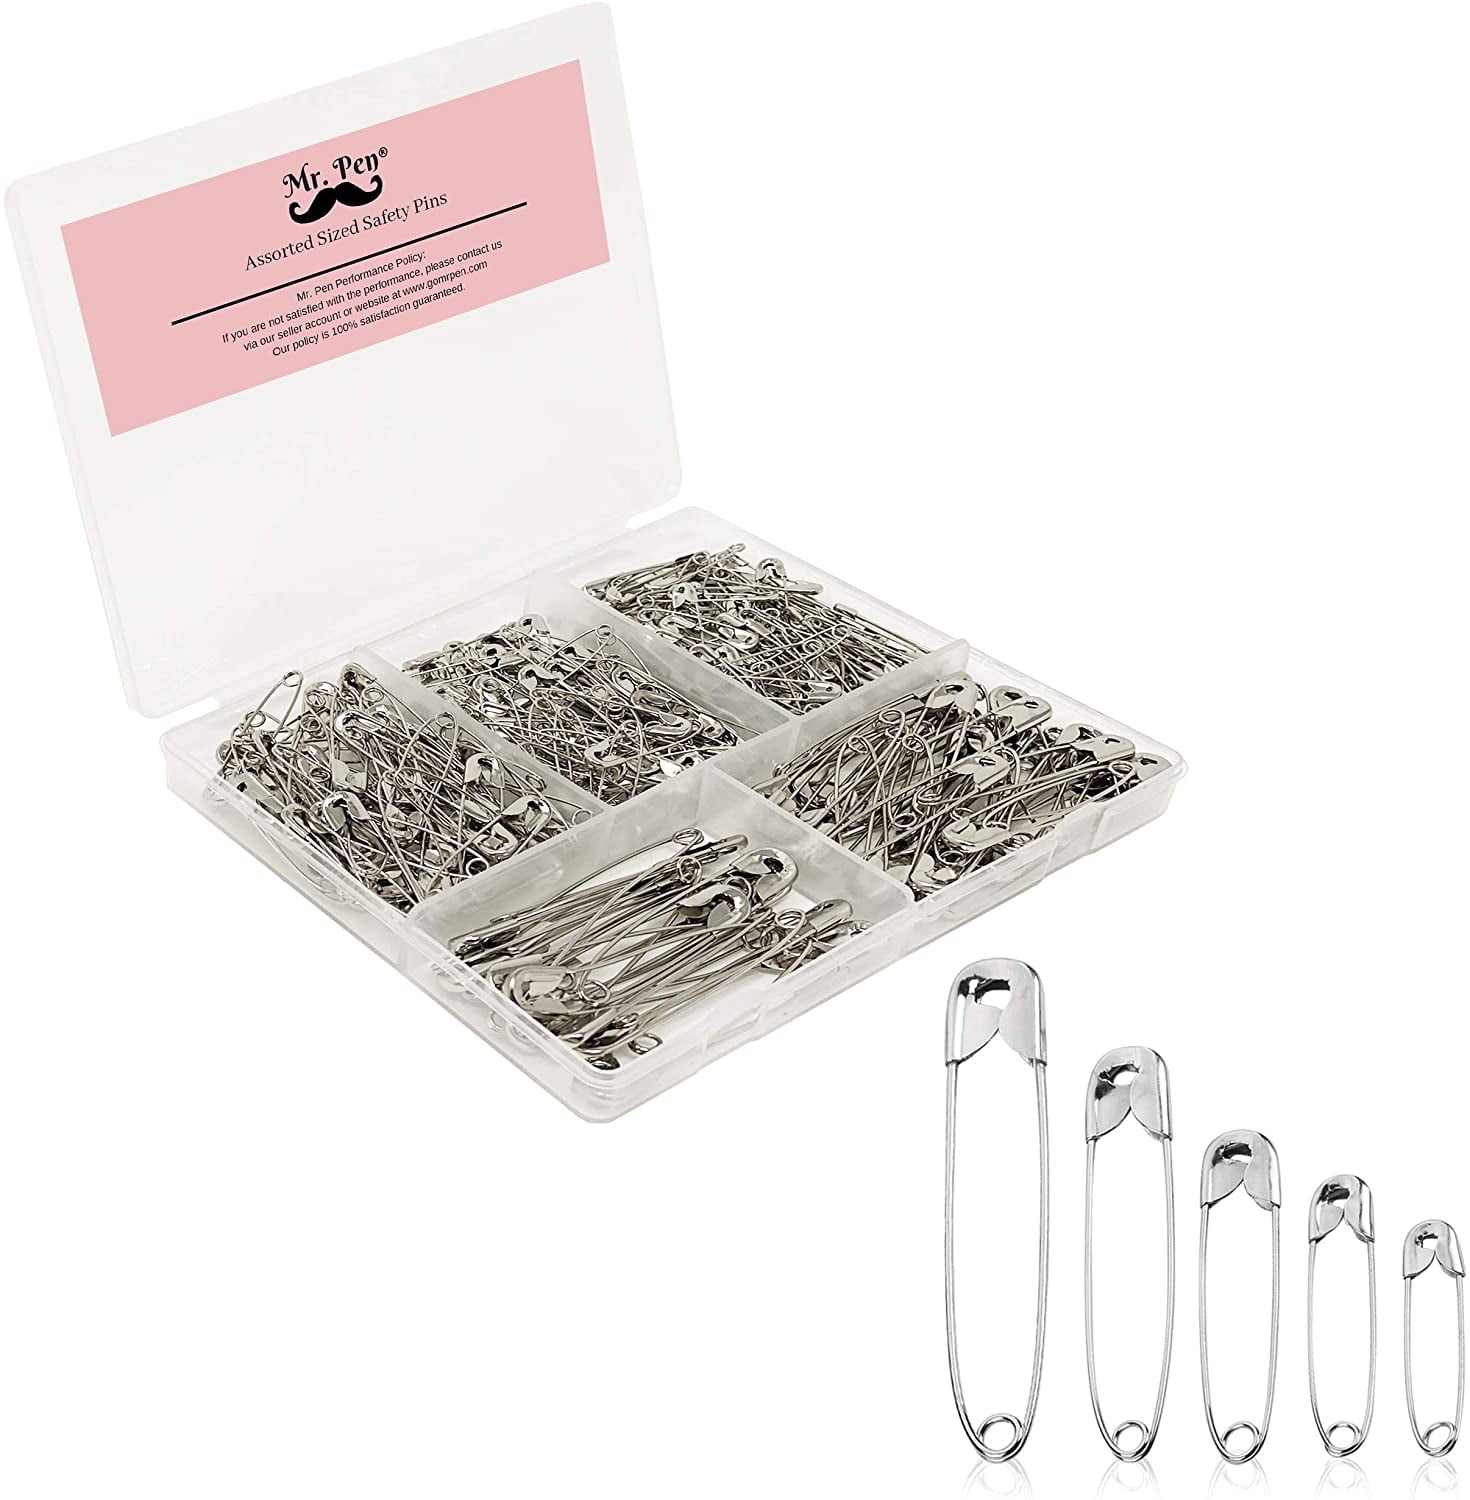 Mr. Pen- Safety Pins, Safety Pins Assorted, 300 Pack, Assorted